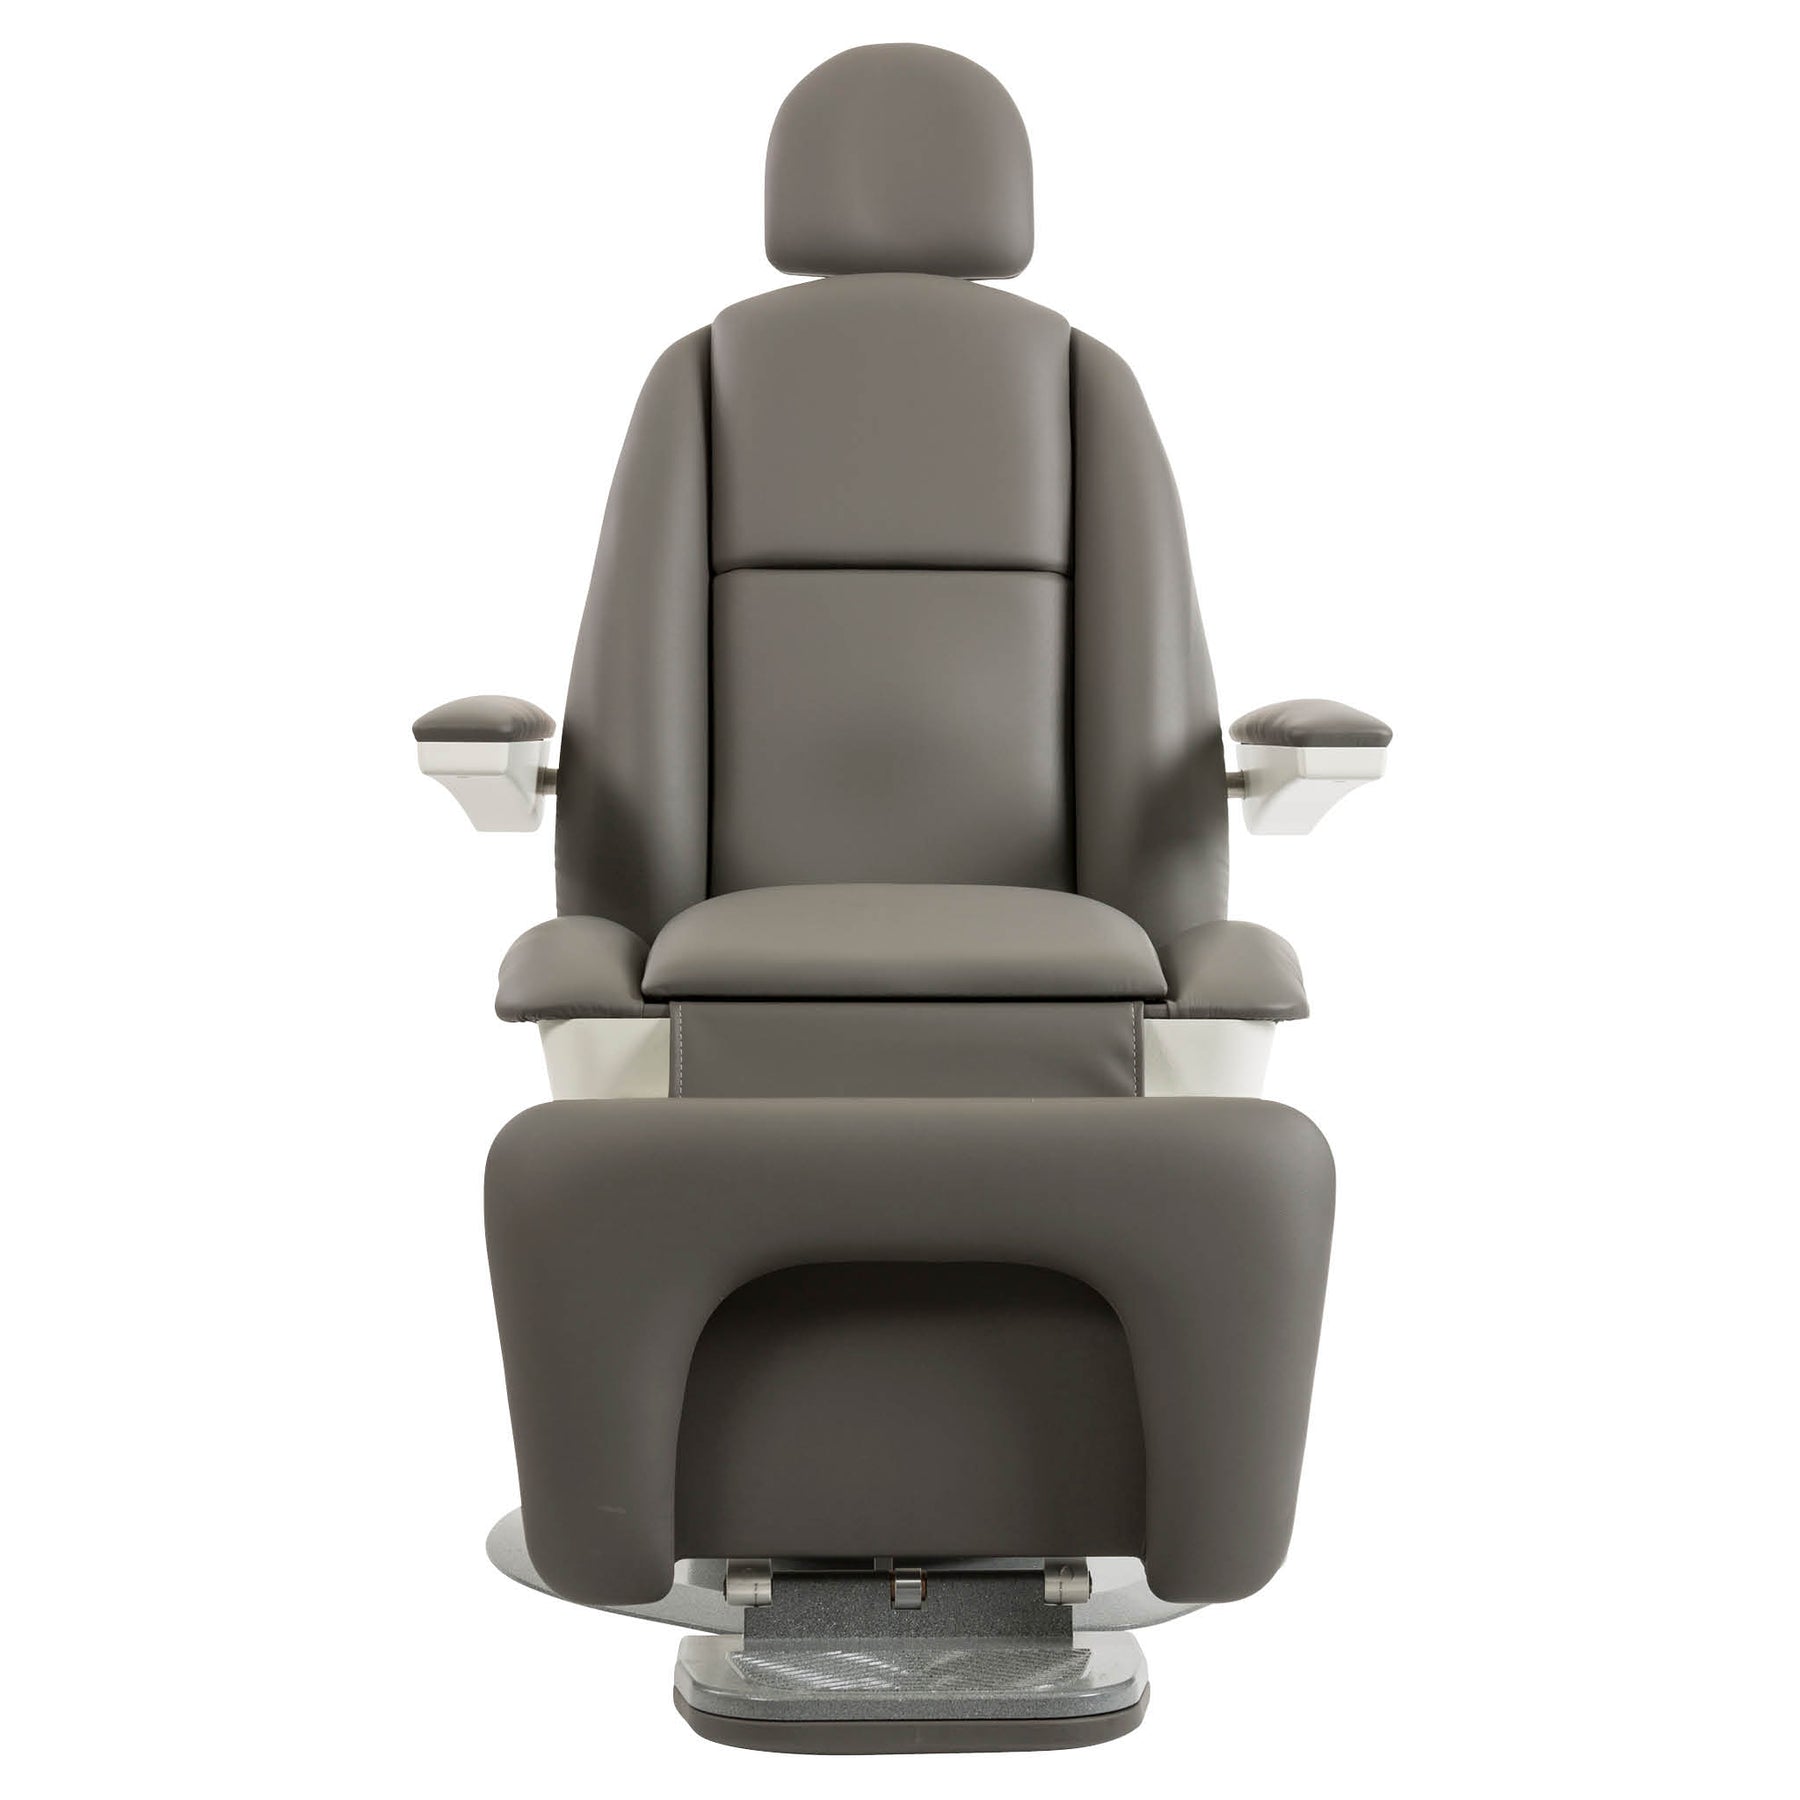 GLOBAL Maxi4500 Patient Chair front